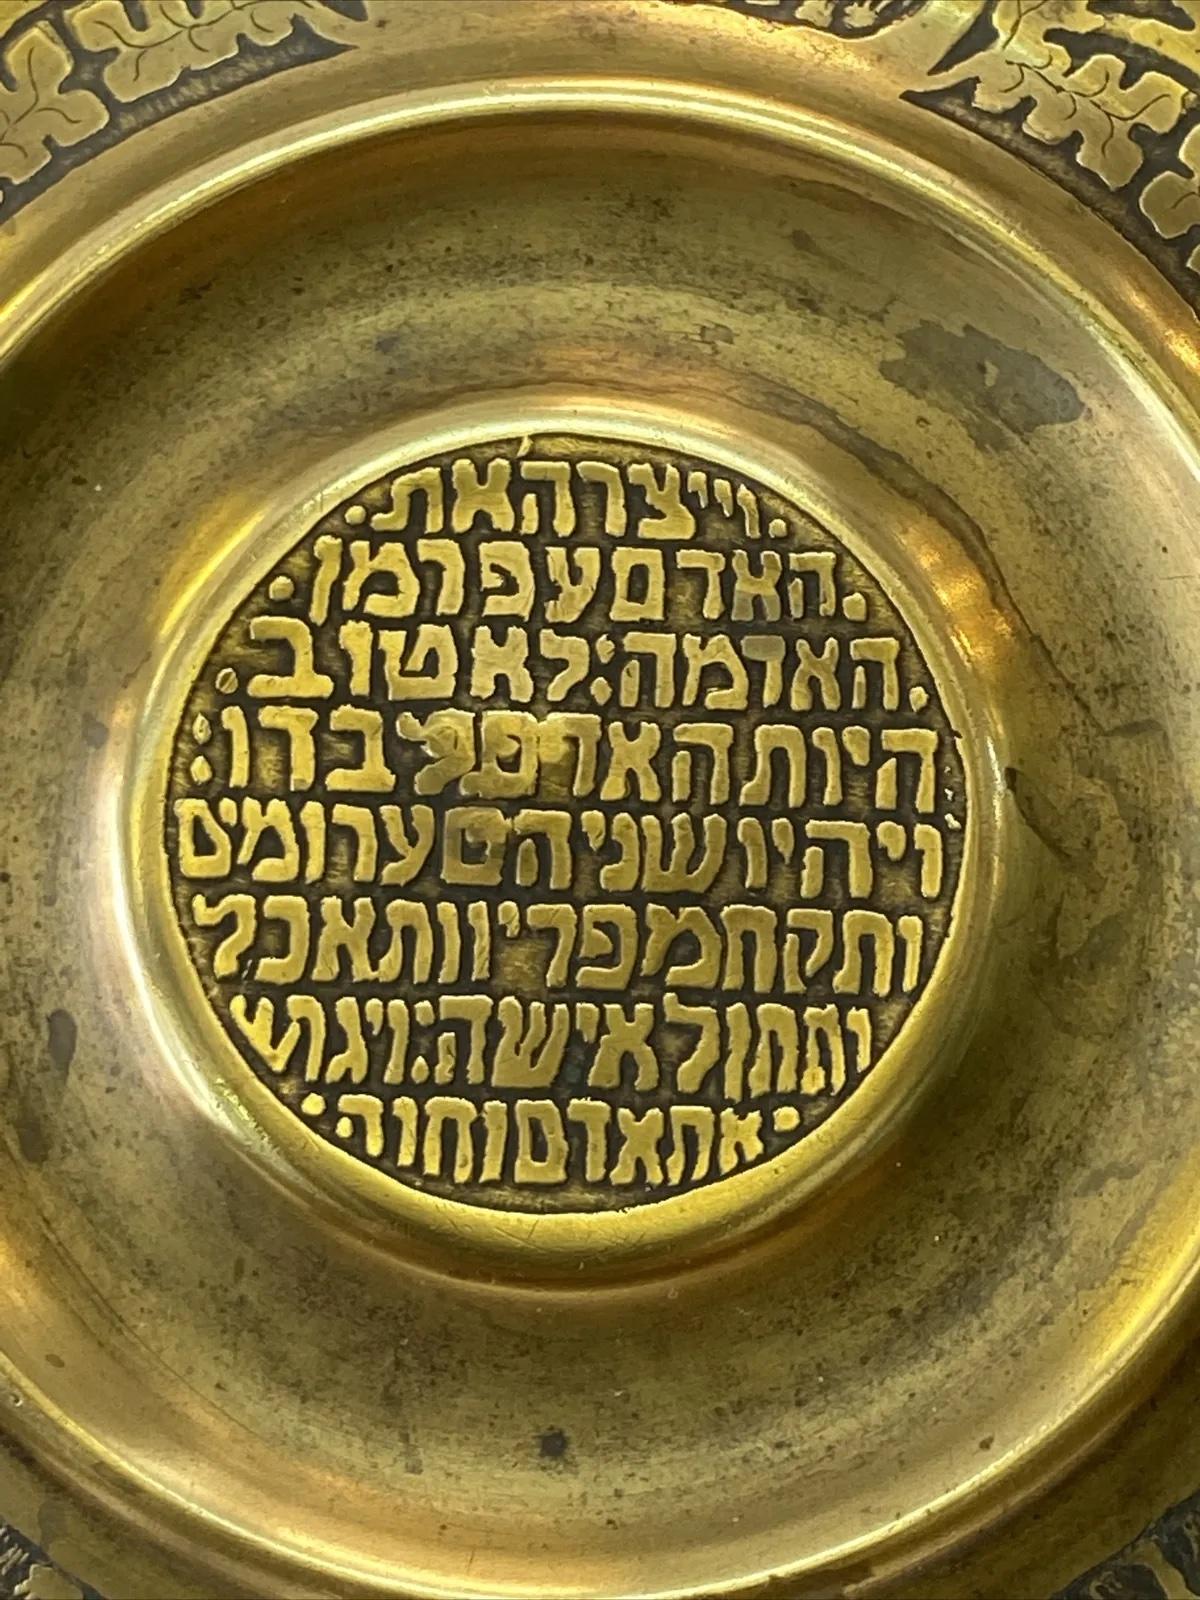 very rare Bezalel Jerusalem plate , this amazing plate has the best subject And artistic Design i have seen in a lot of years, the plate has 5 different scenes from the story Of Adam And Eve in the garden pf Eden.
On the middle of the plate the is